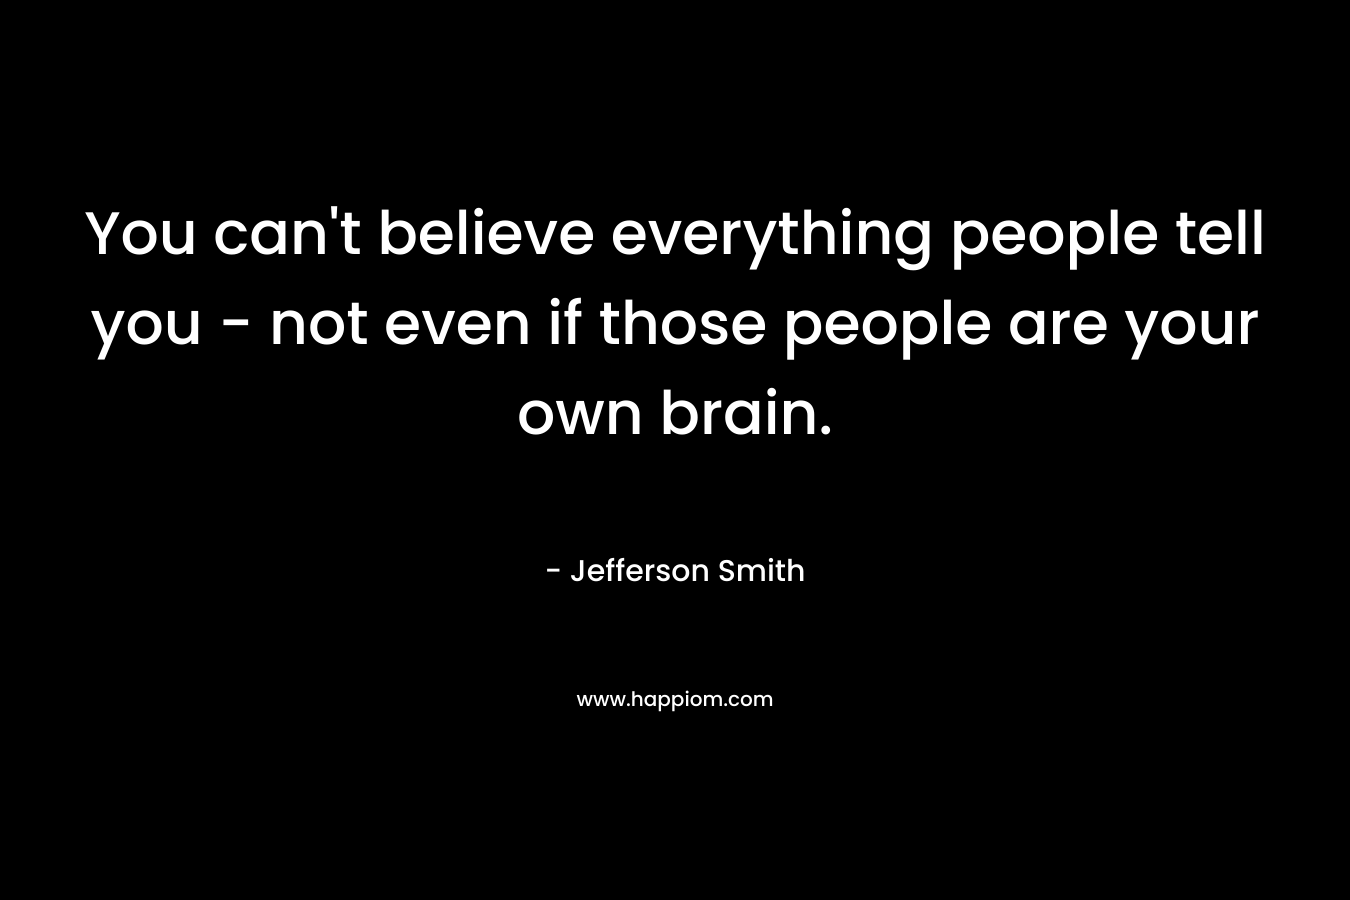 You can't believe everything people tell you - not even if those people are your own brain.